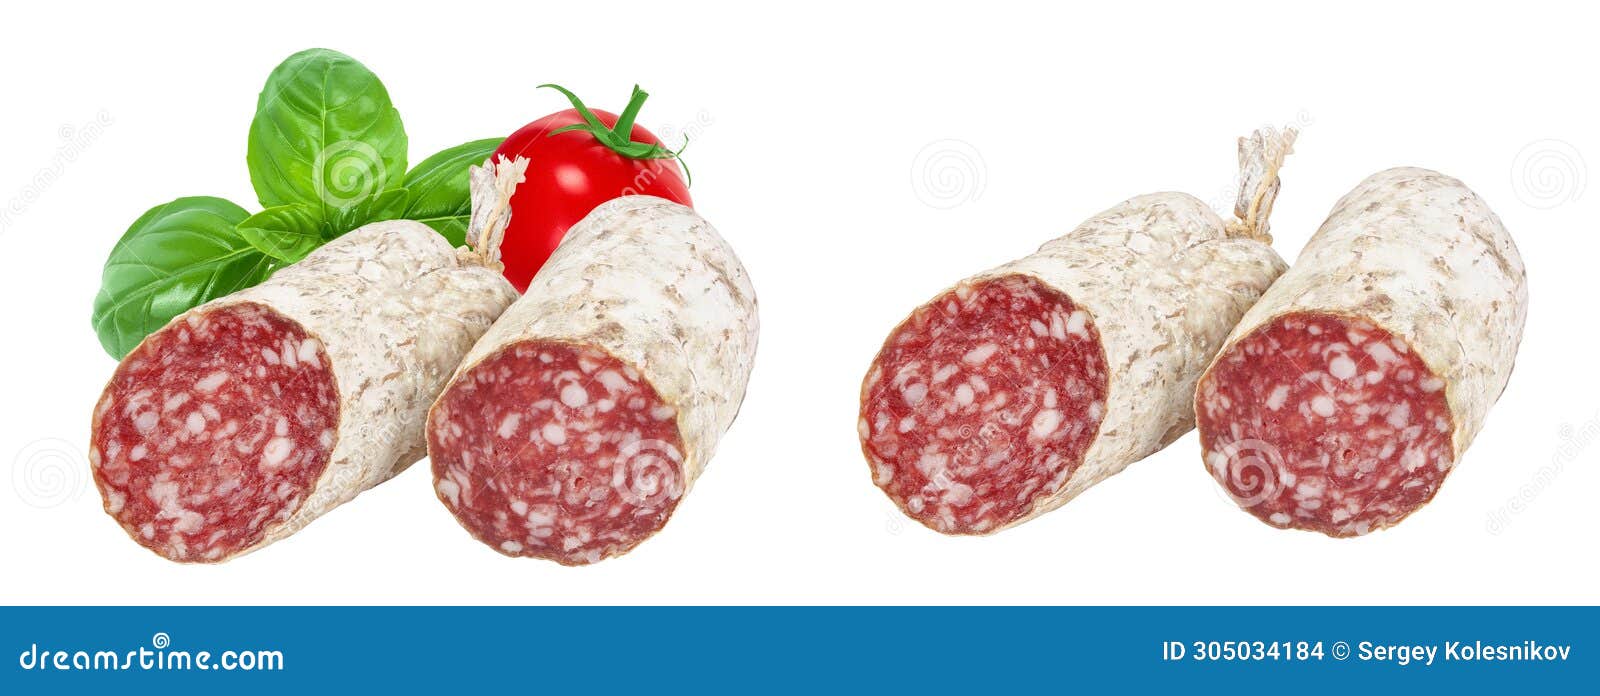 cured salami sausage  on white background. italian cuisine with full depth of field